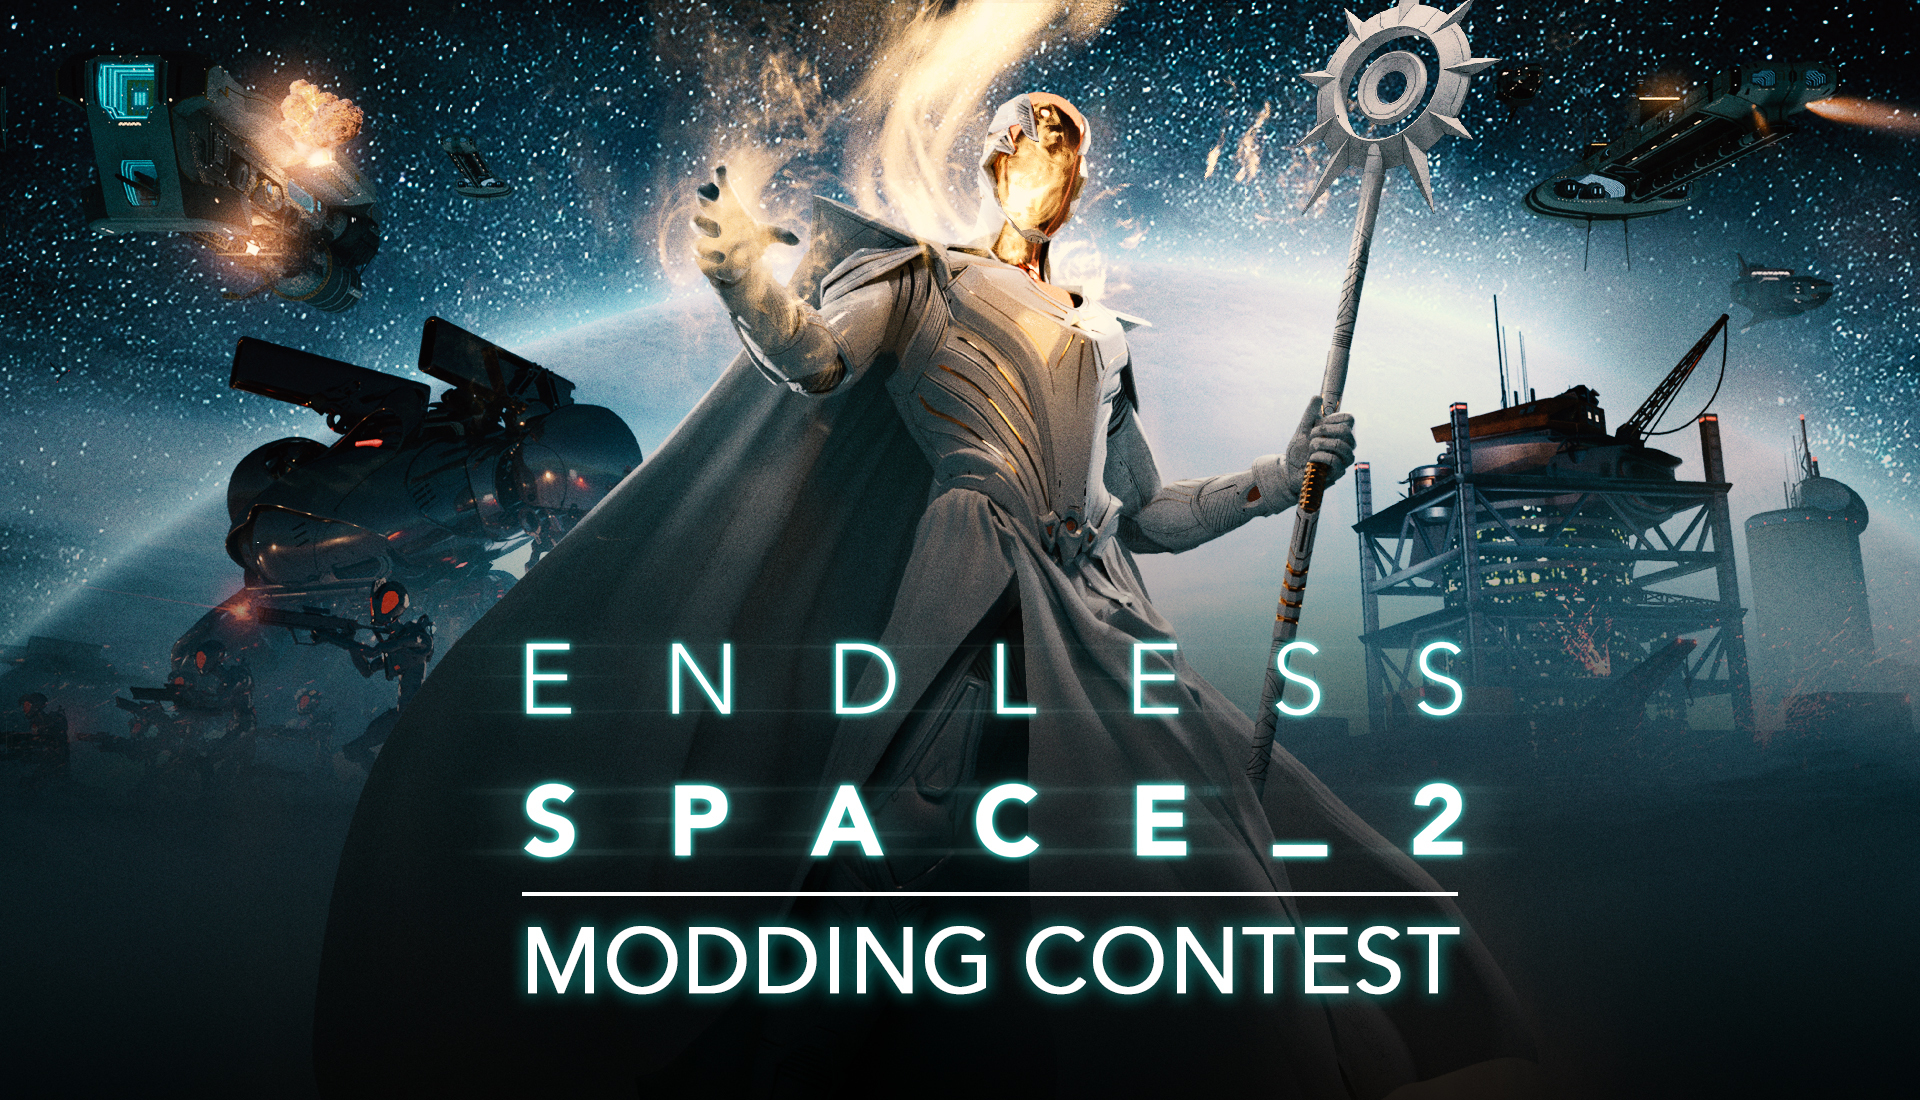 Is endless space on steam фото 83